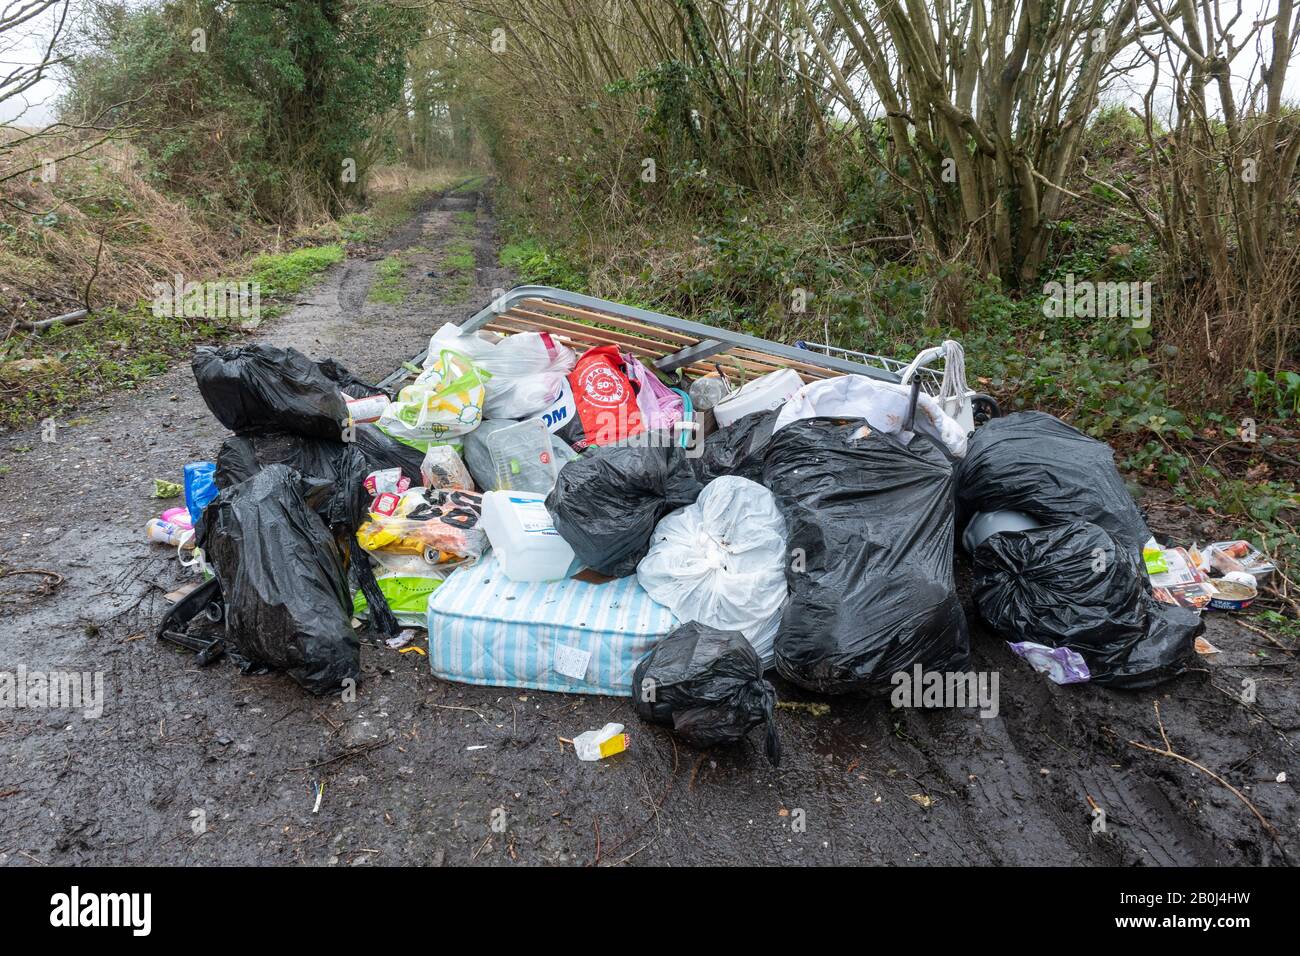 Large pile of fly tipped rubbish garbage litter waste refuse. Fly tipping problem in the UK countryside. Stock Photo